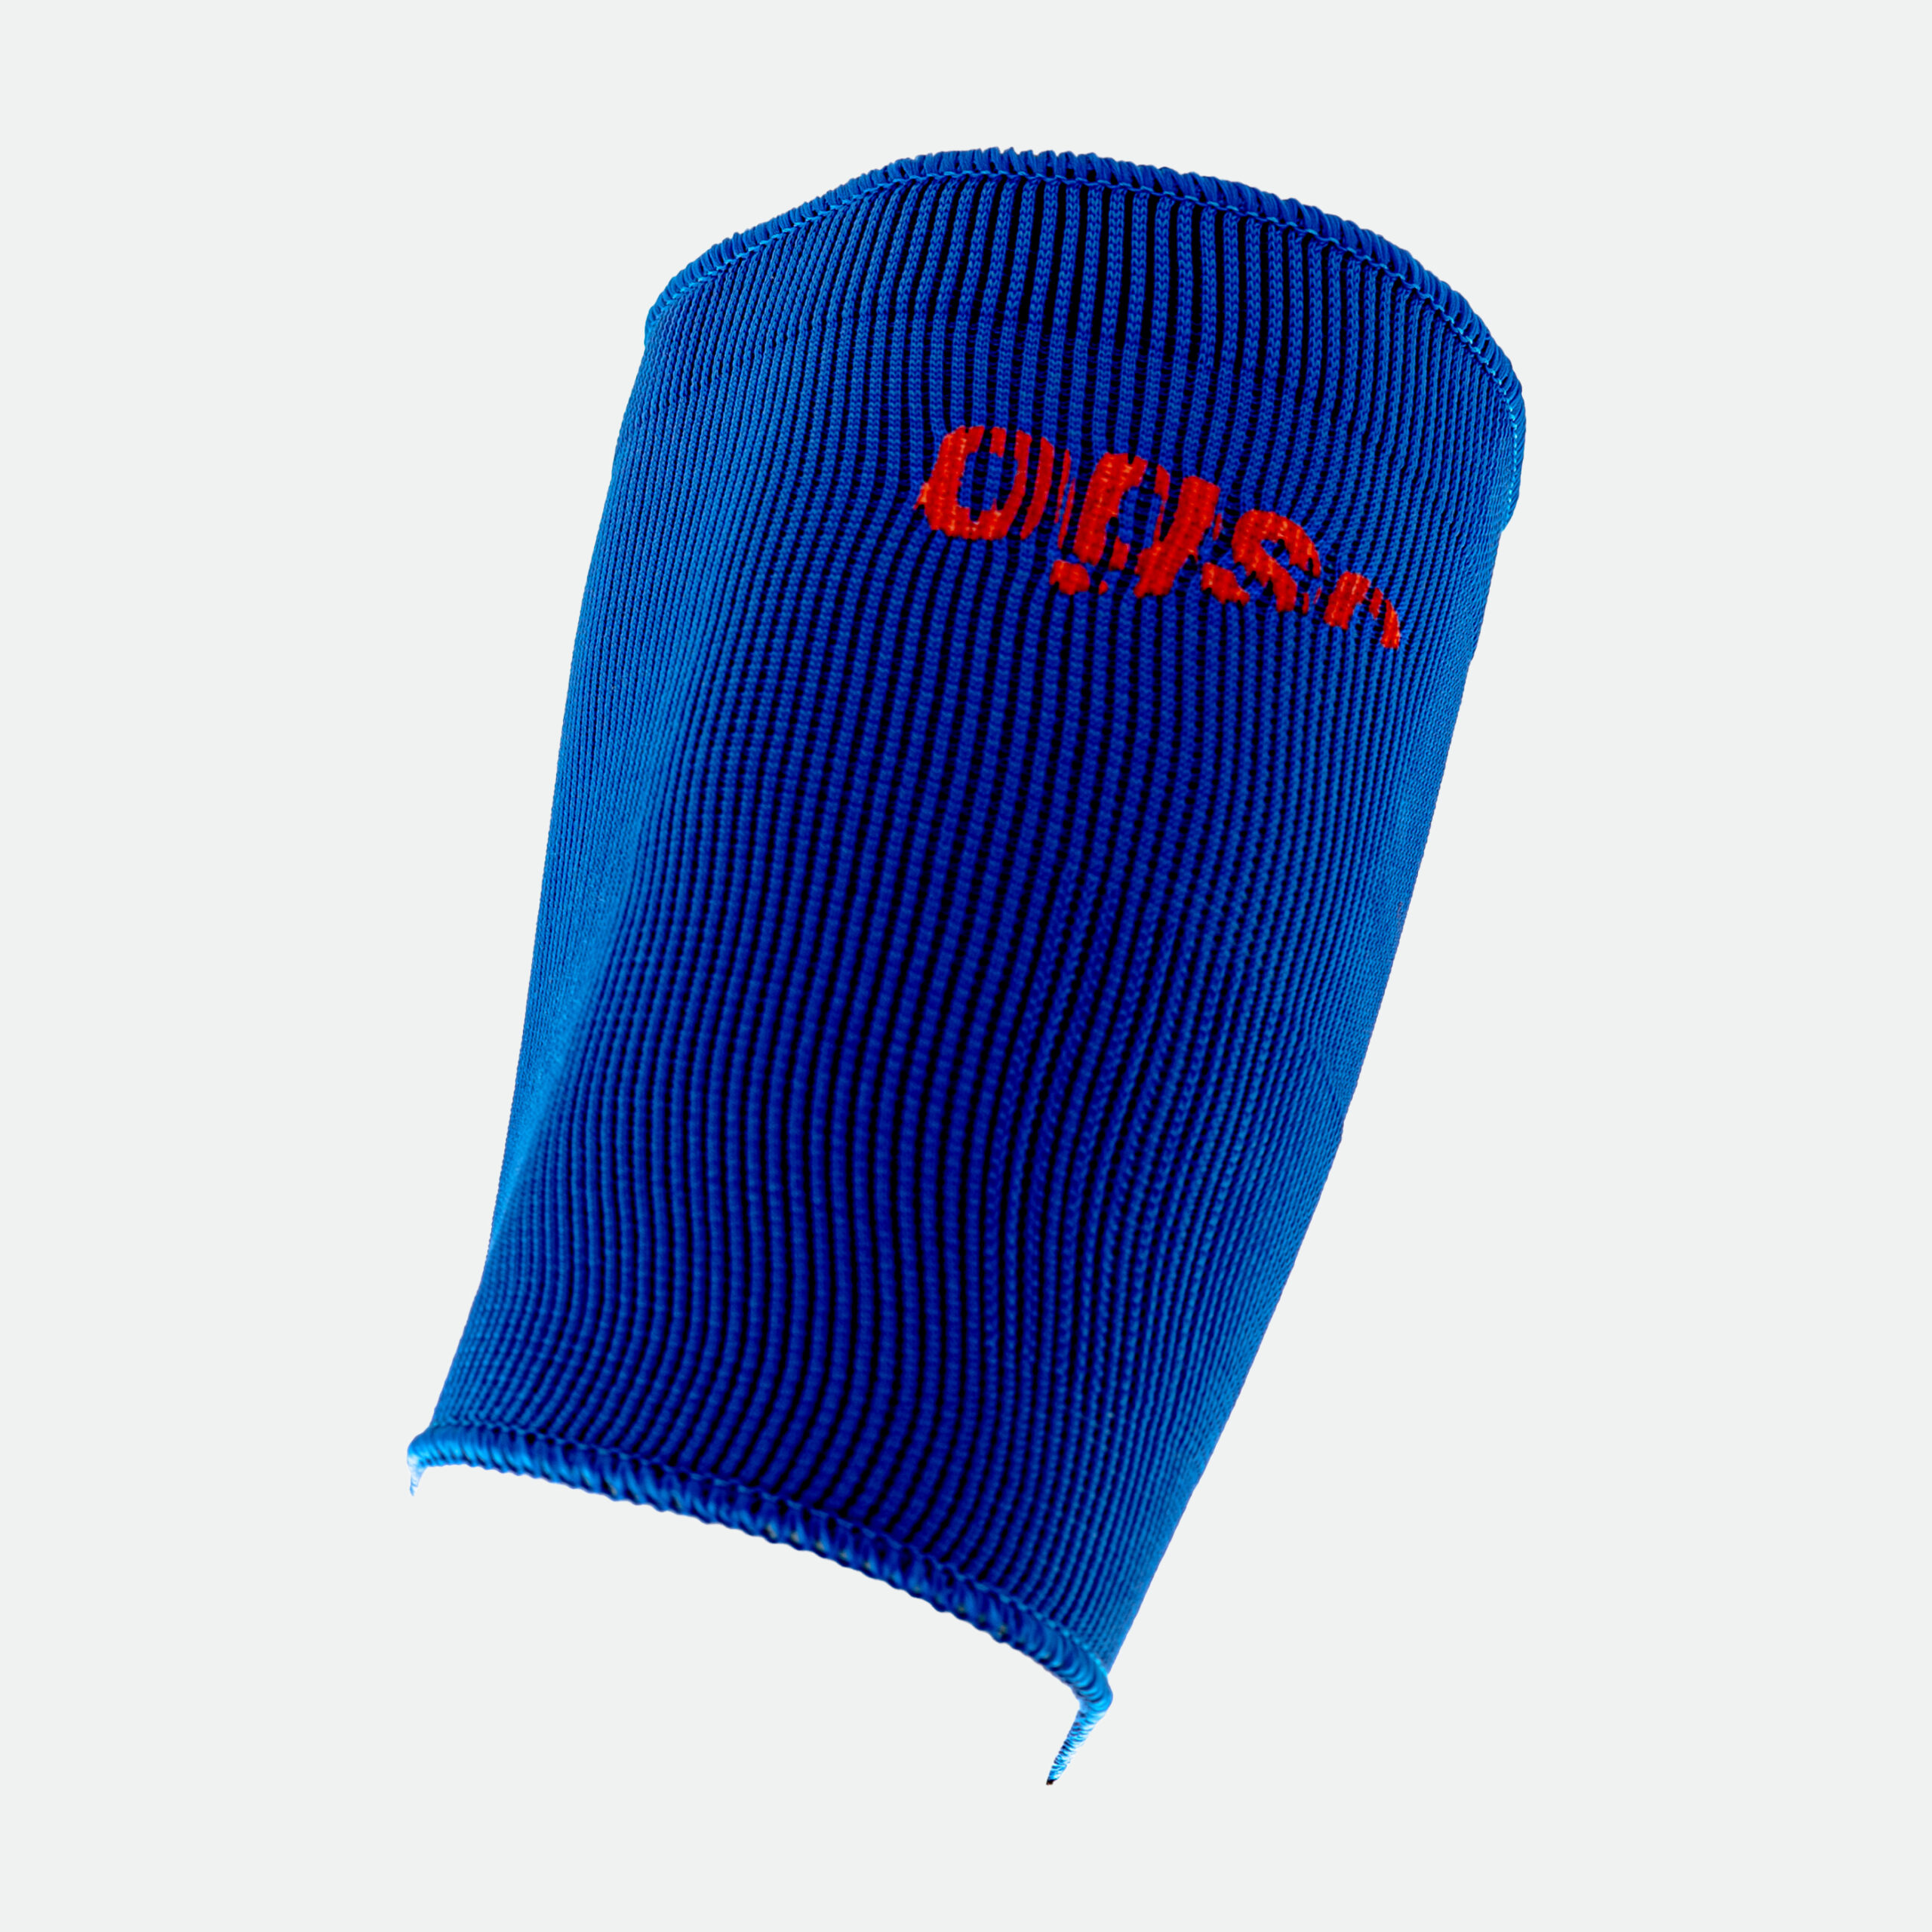 Thigh Support Blue 2